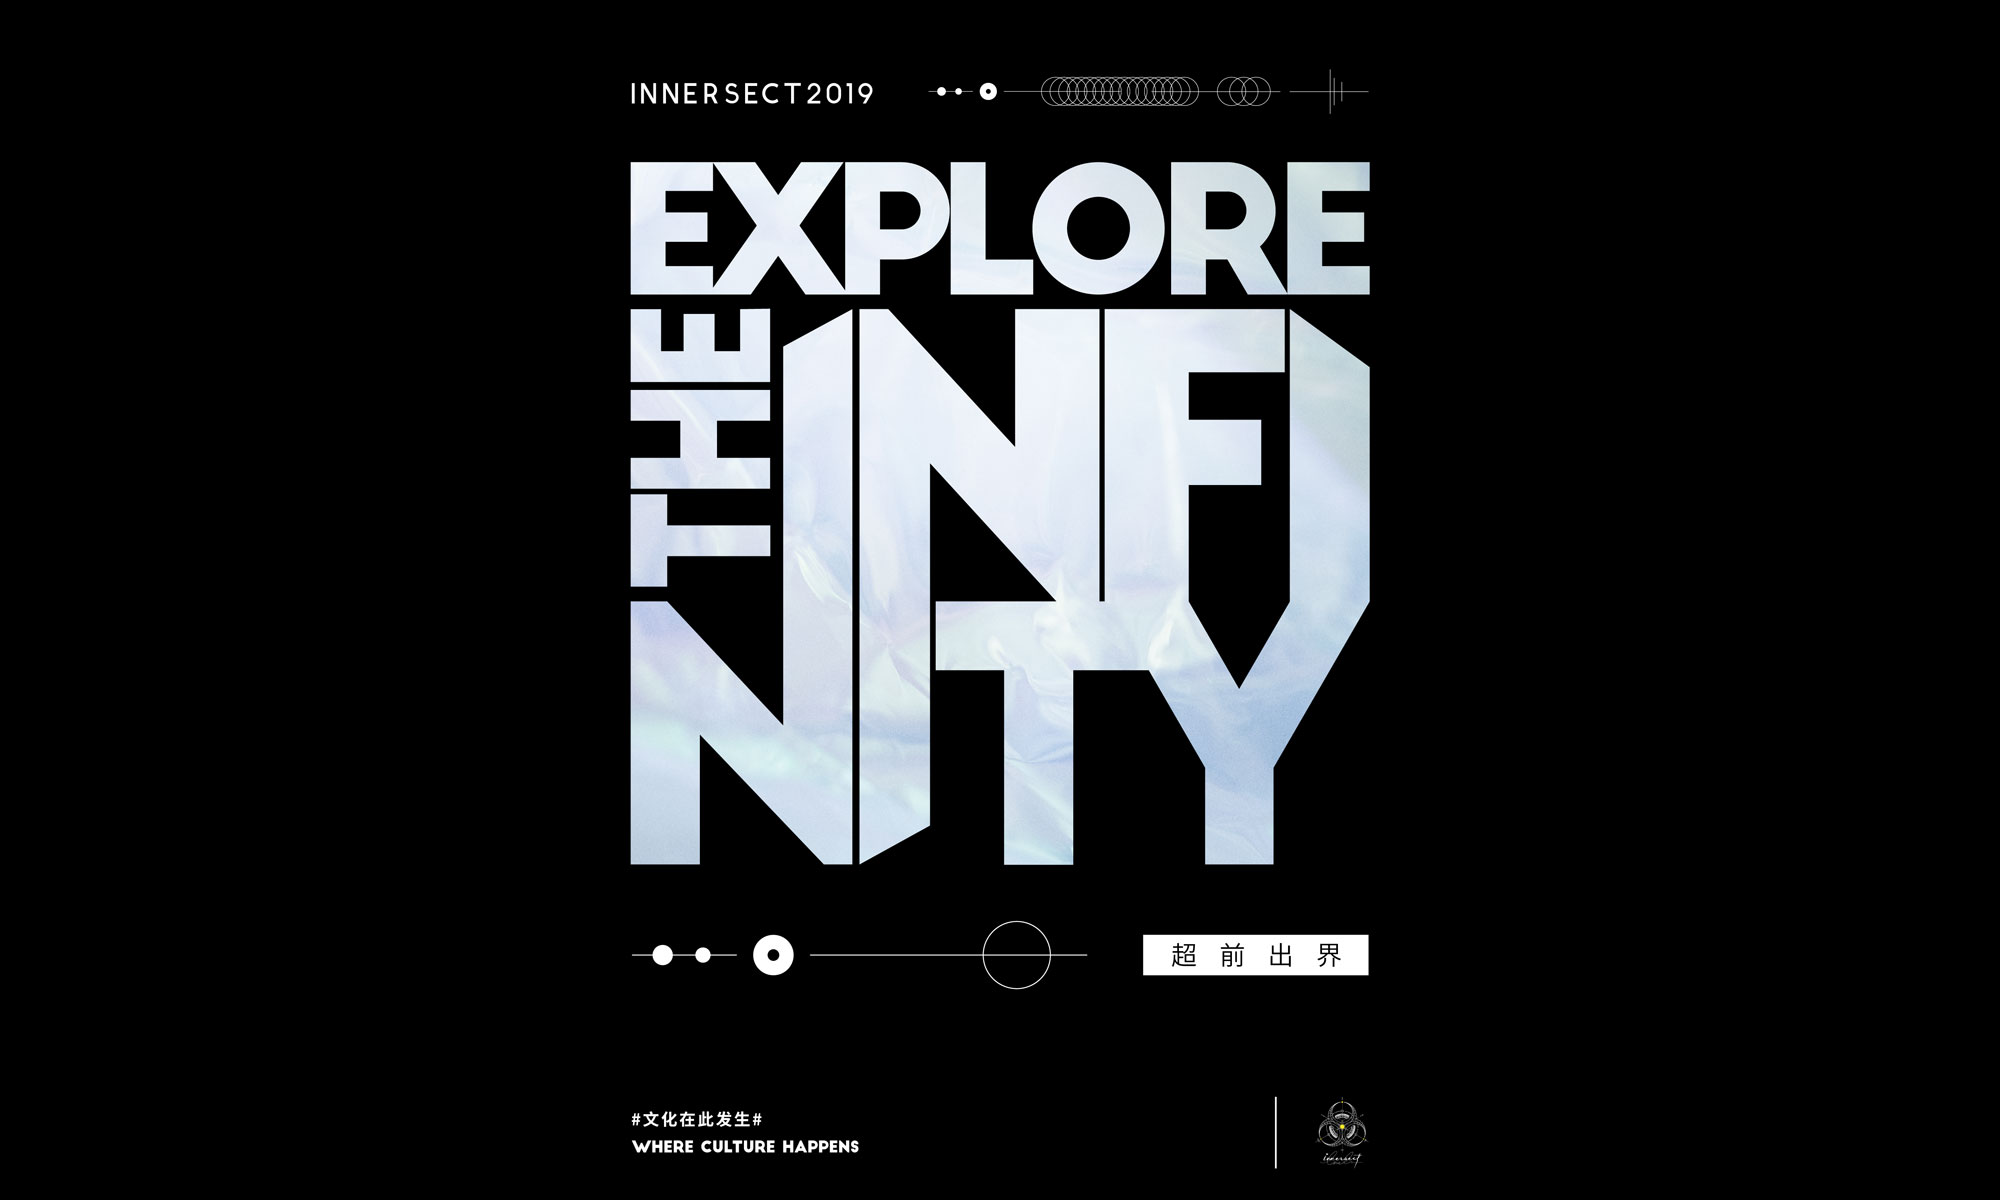 “EXPLORE THE INFINITY 超前出界”，INNERSECT 官宣 2019 展会主题